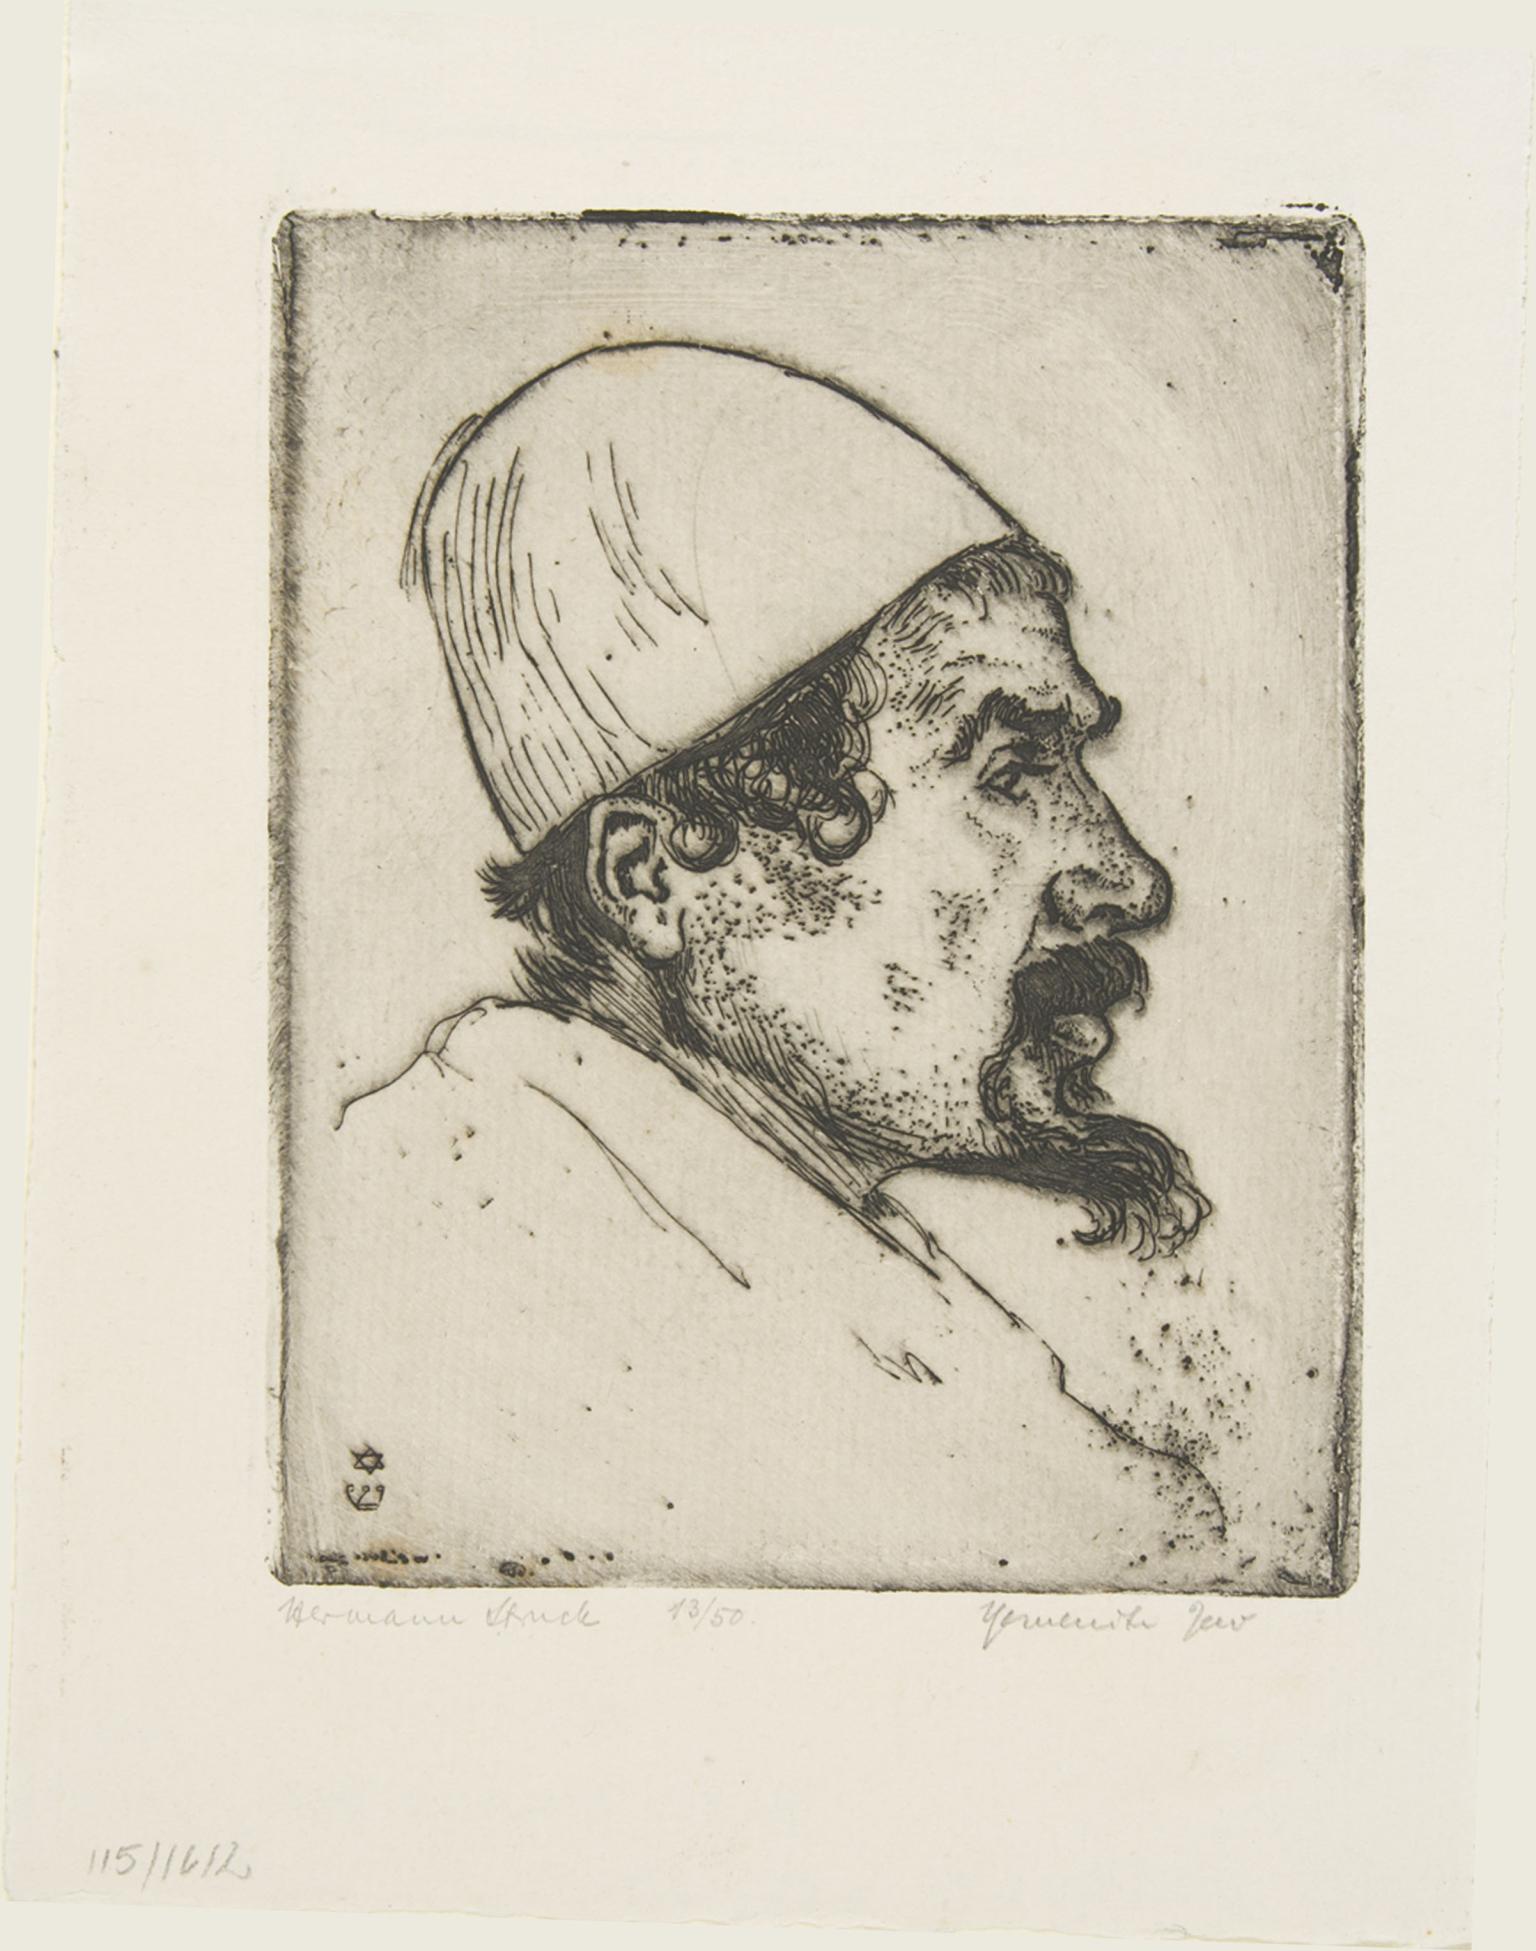 Etching of man with beard wearing a hat in profile.